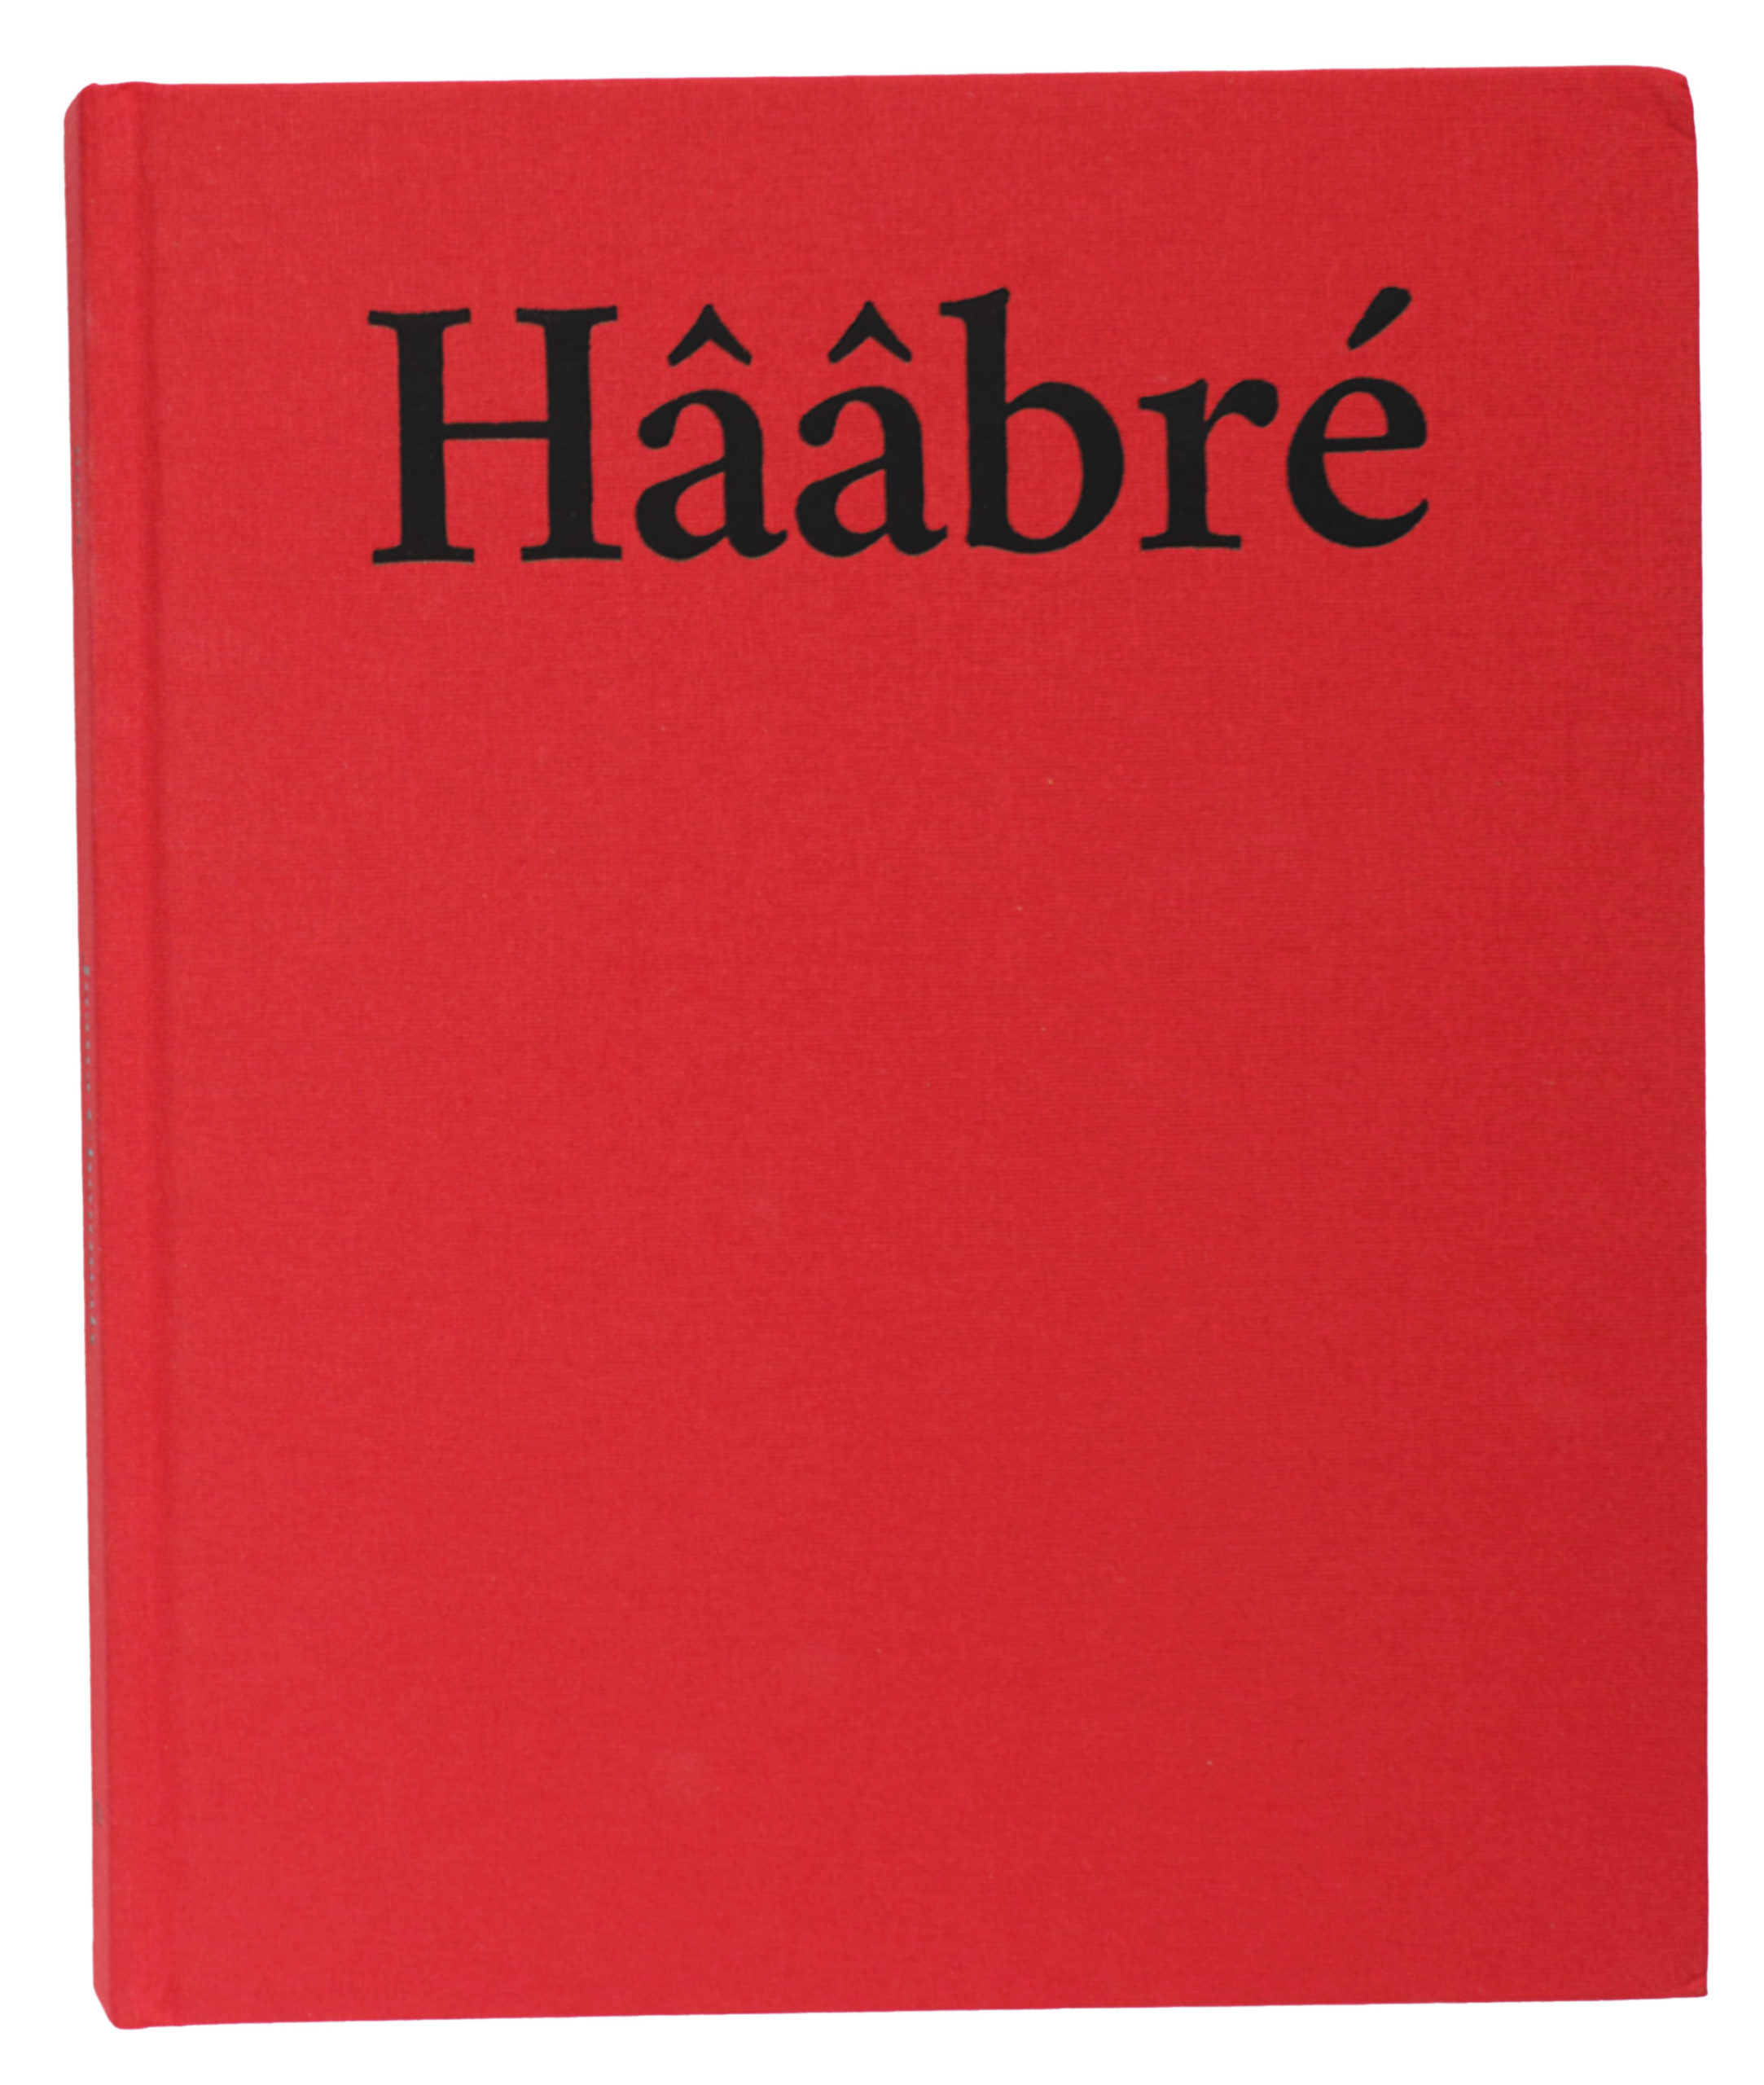 Africainthephotobook-delpire-haabre-couve